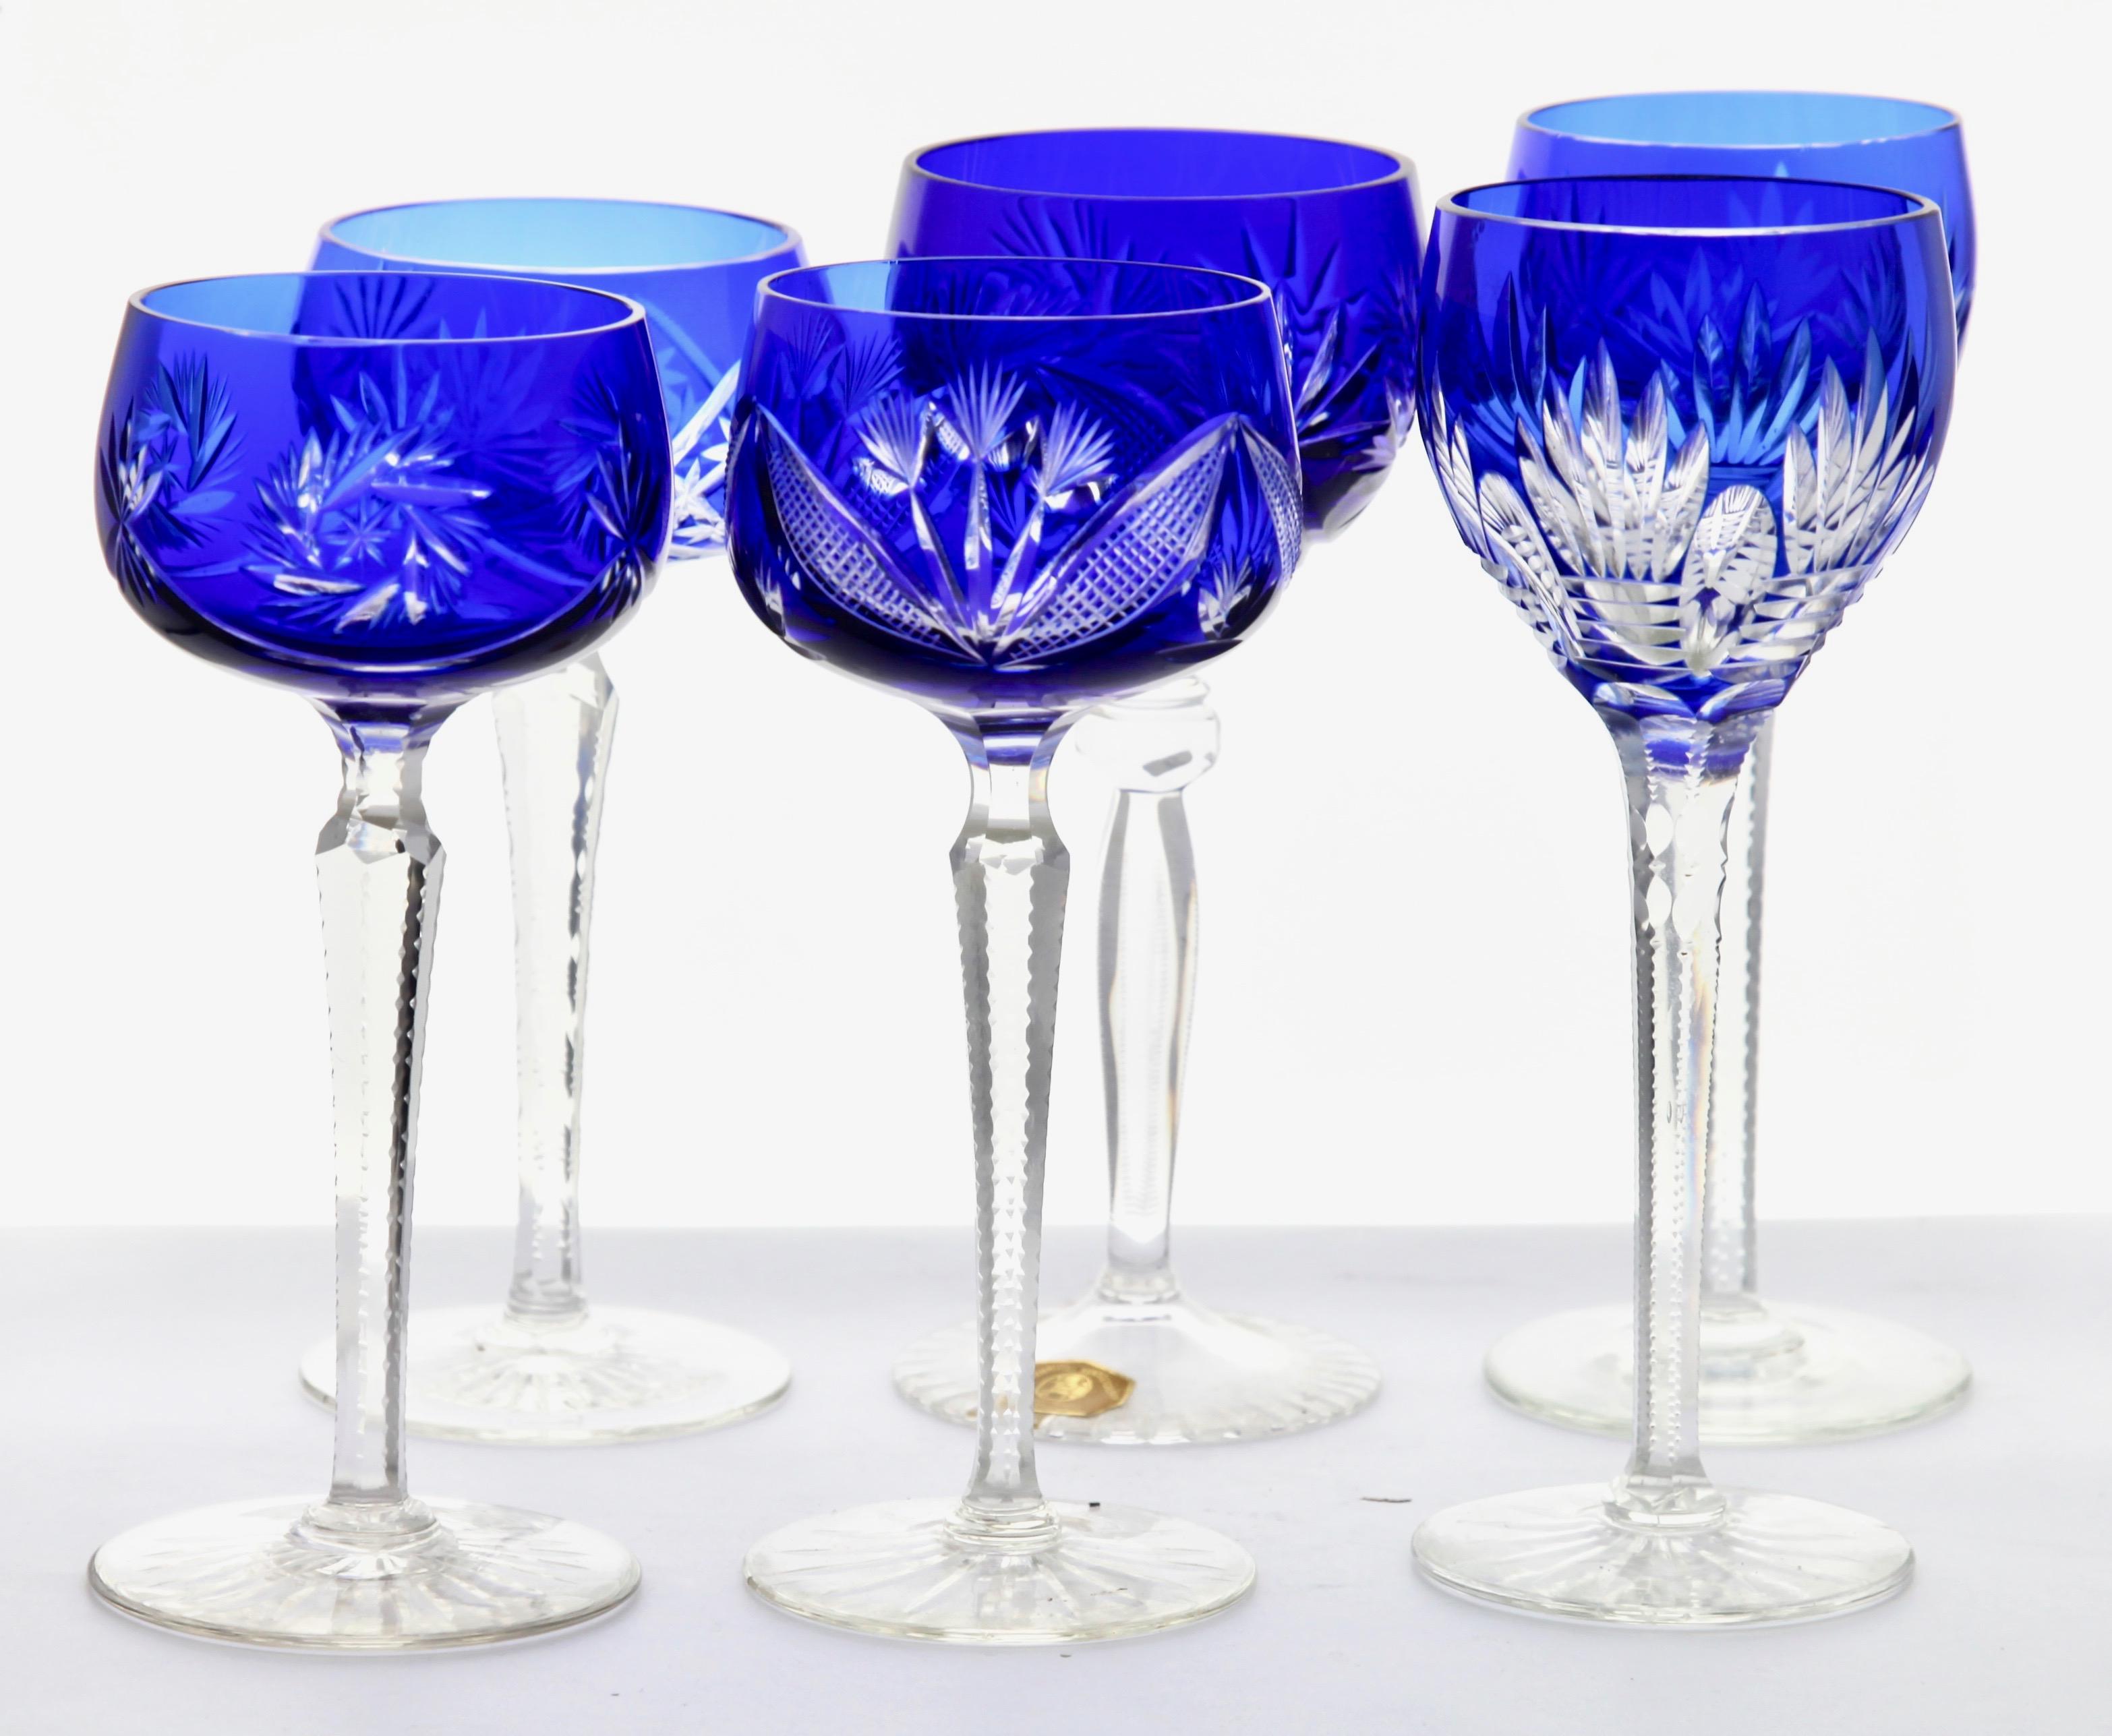 Vintage of 6 cut to clear crystal stem glasses in cobalt blue, 1960s
Clear crystal glass. Six sides facetted and toothed stem. The bowl with a cobalt blue overlay cut to clear.
 In the best condition.

We specialise in Art Nouveau, Art Deco and